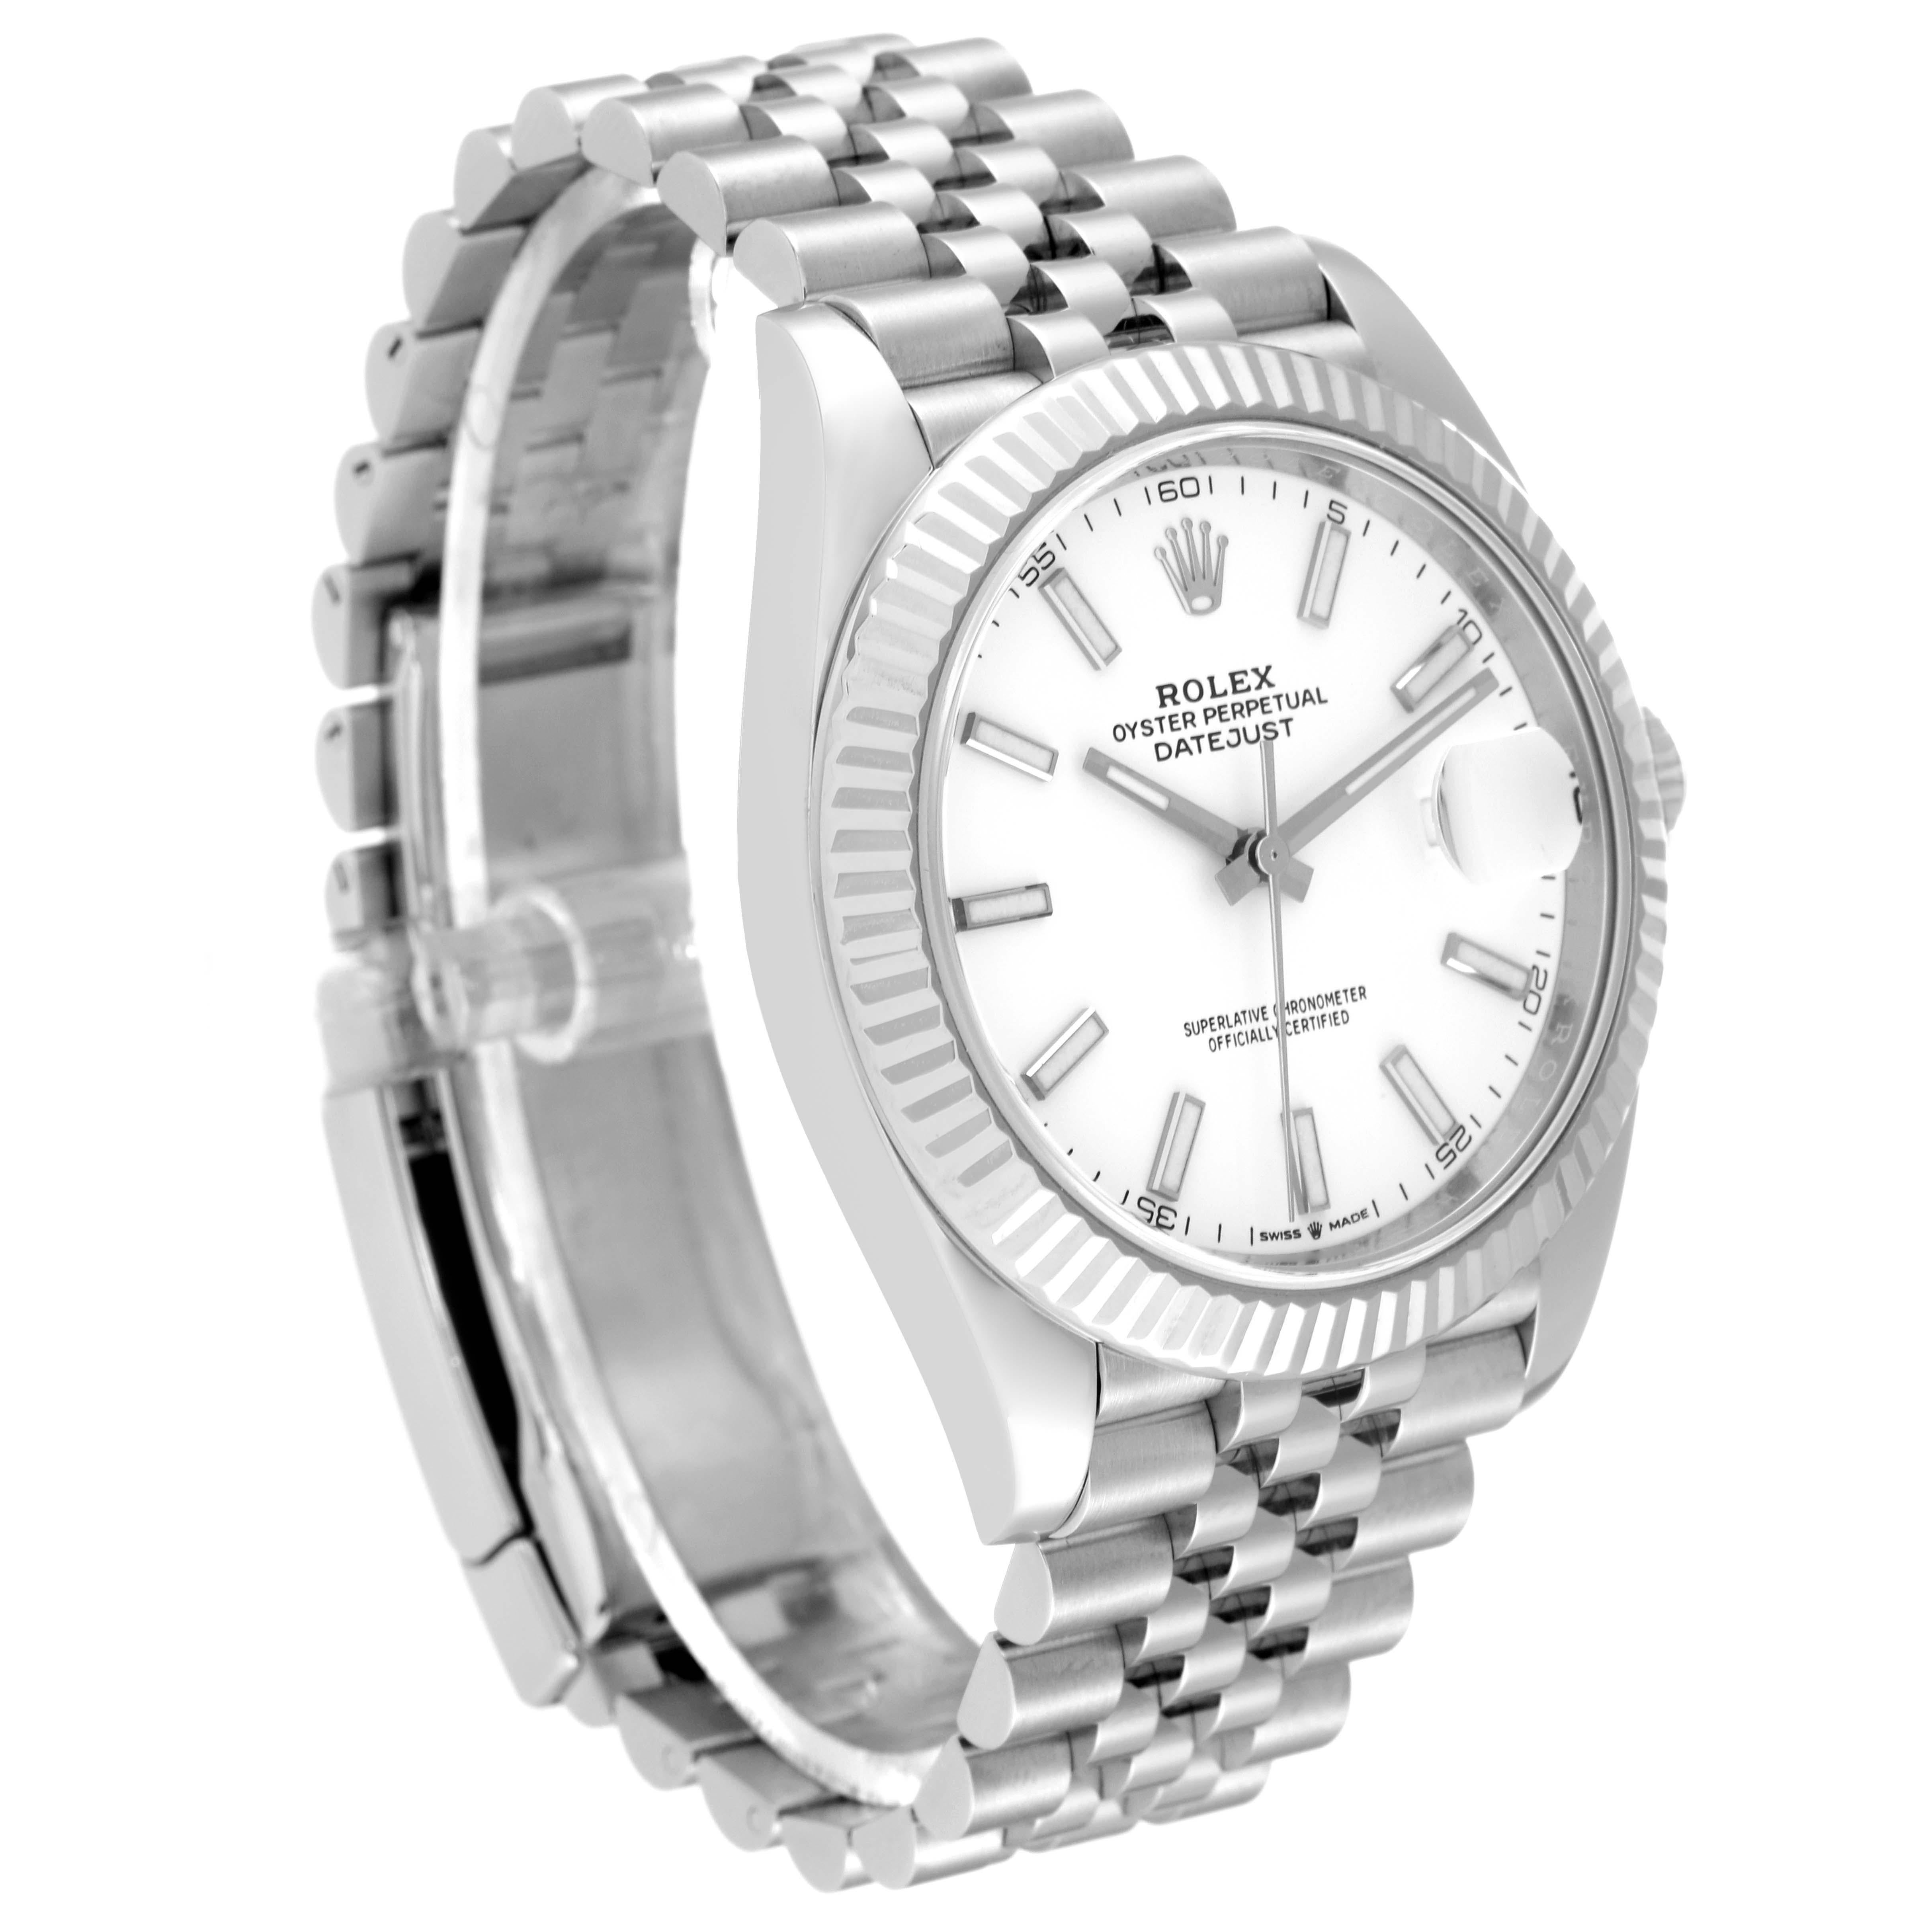 Rolex Datejust 41 White Dial Steel Mens Watch 126334 Box Card In Excellent Condition For Sale In Atlanta, GA